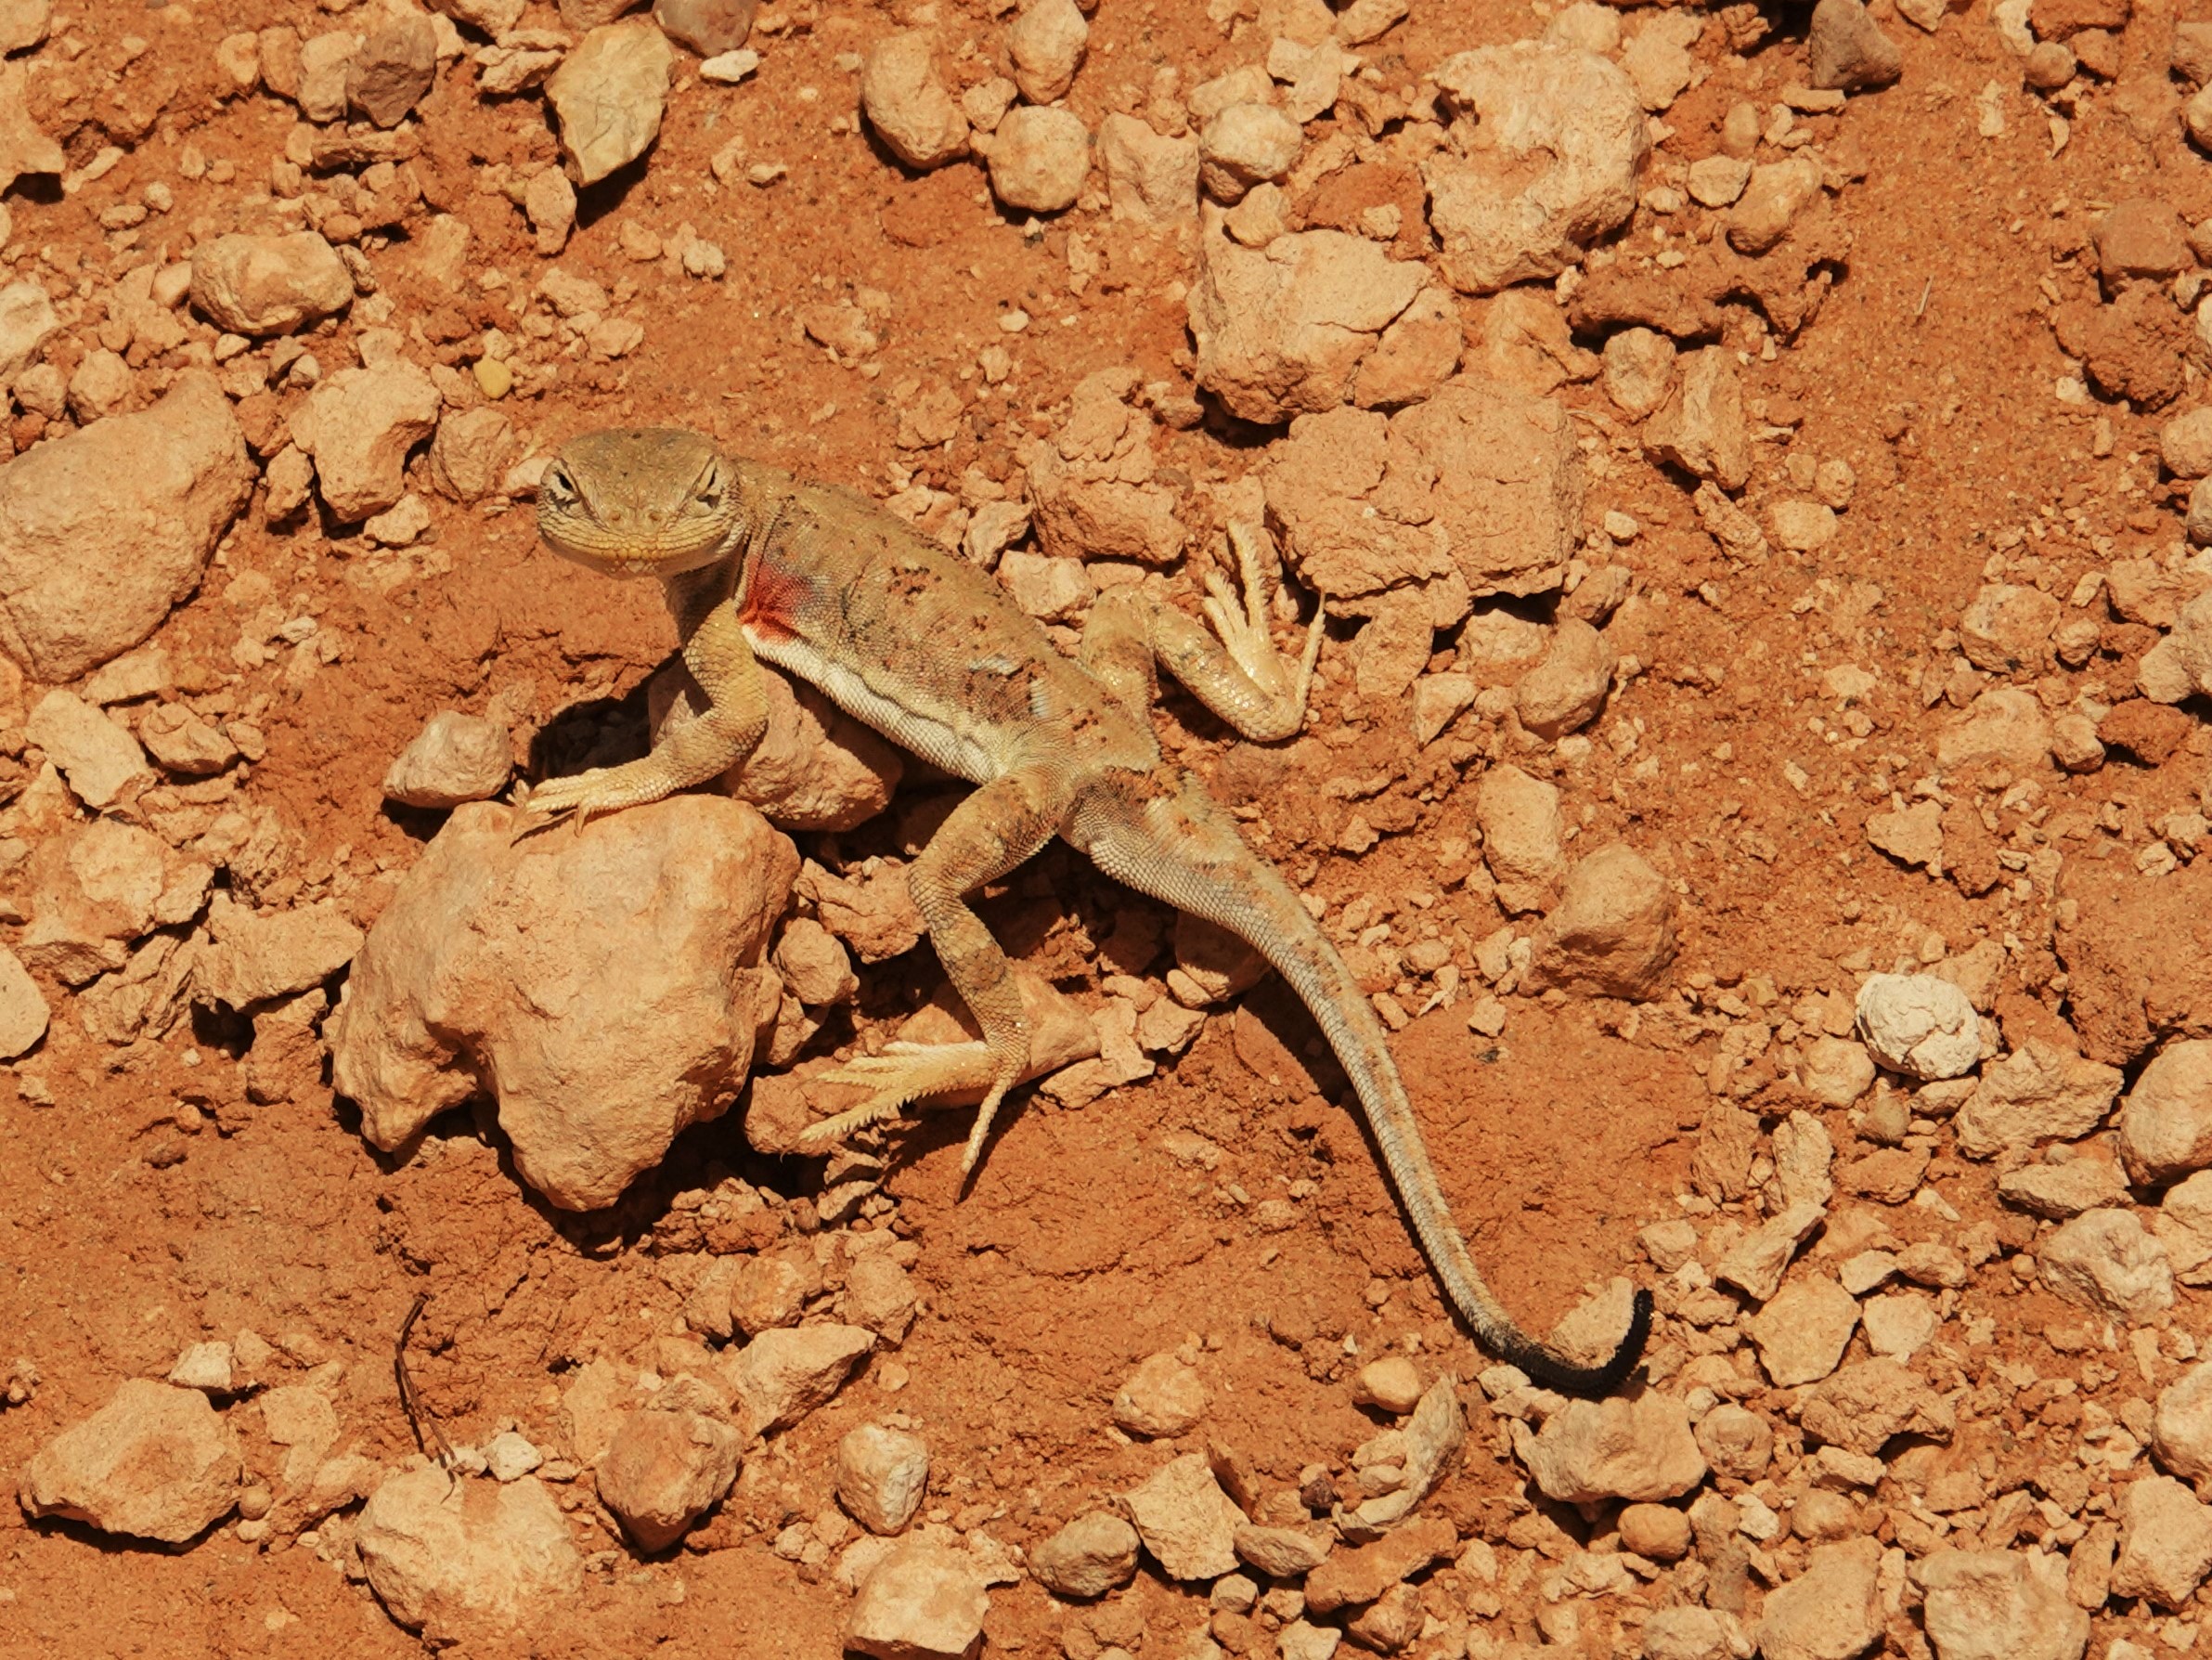 At the Flaming Cliffs in Mongolia's Gobi, Toadhad Agama, Lizard